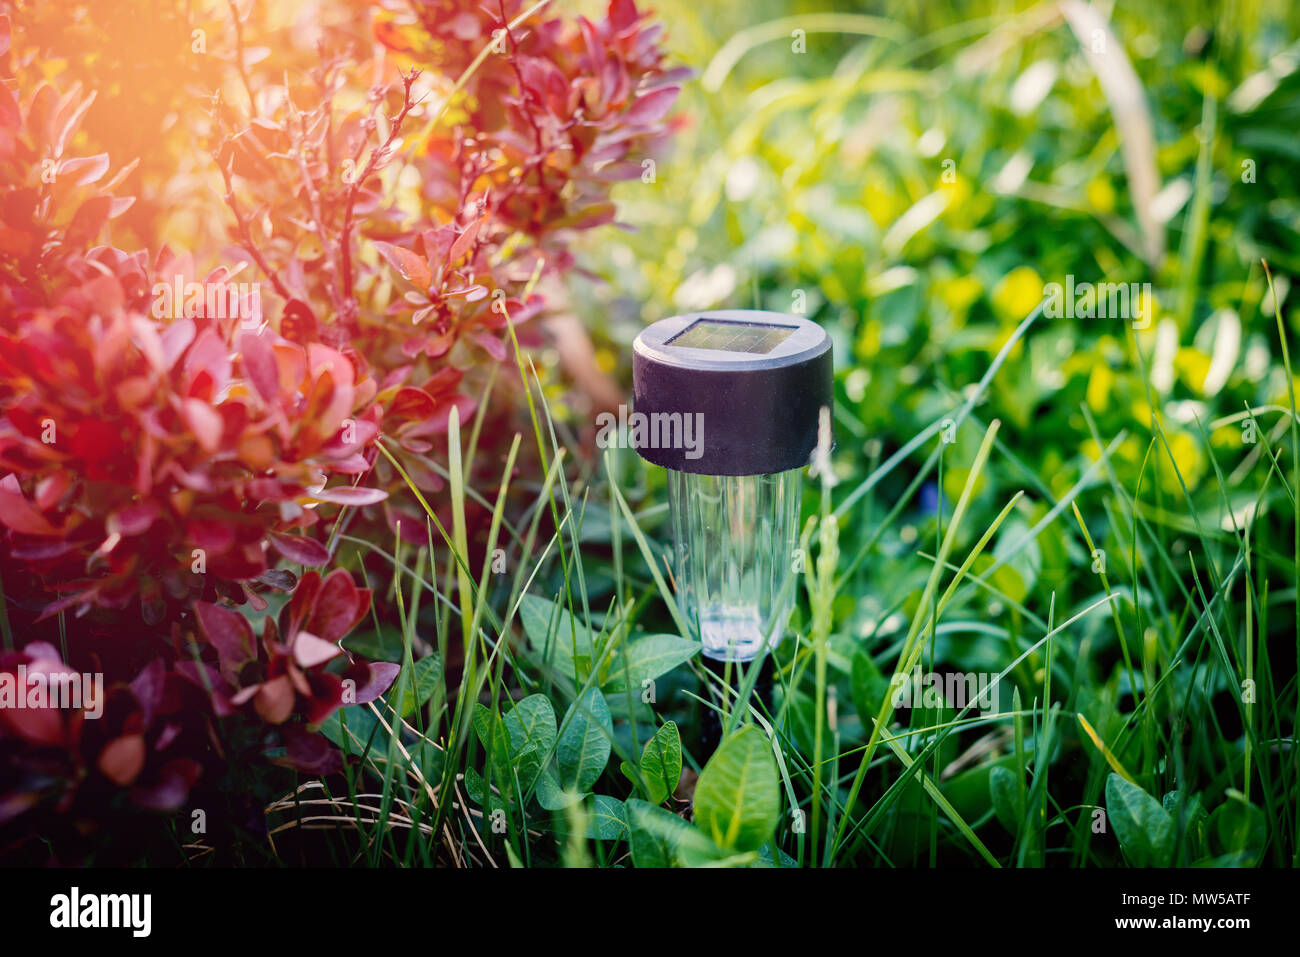 Solar battery light. Garden electric lamp for electricity from solar panels. Stock Photo